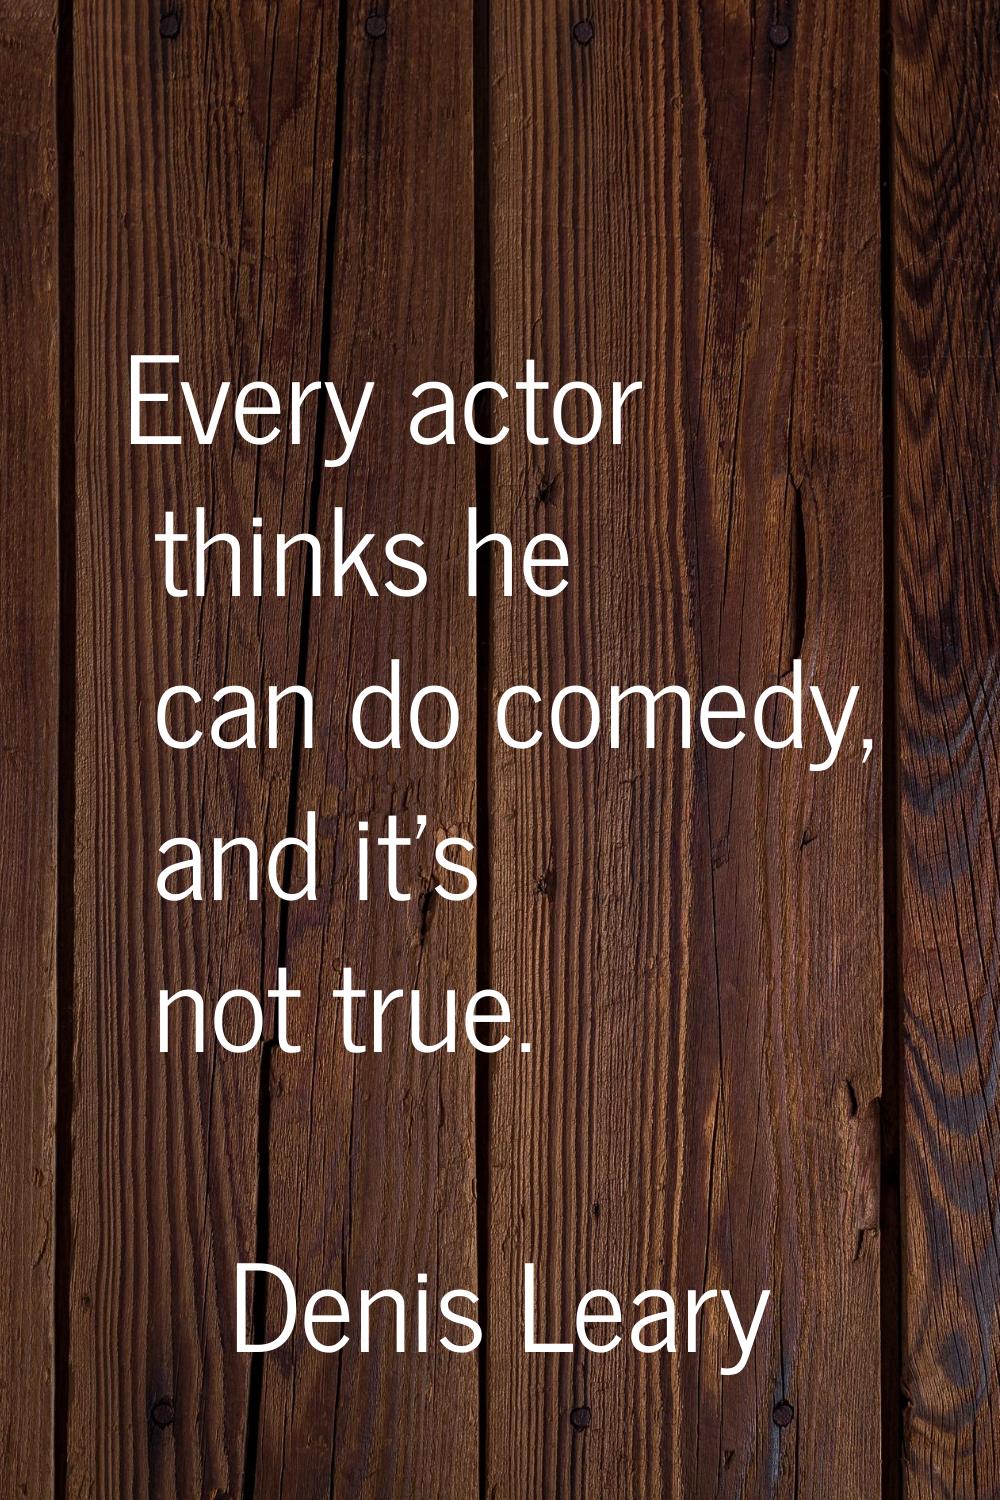 Every actor thinks he can do comedy, and it's not true.